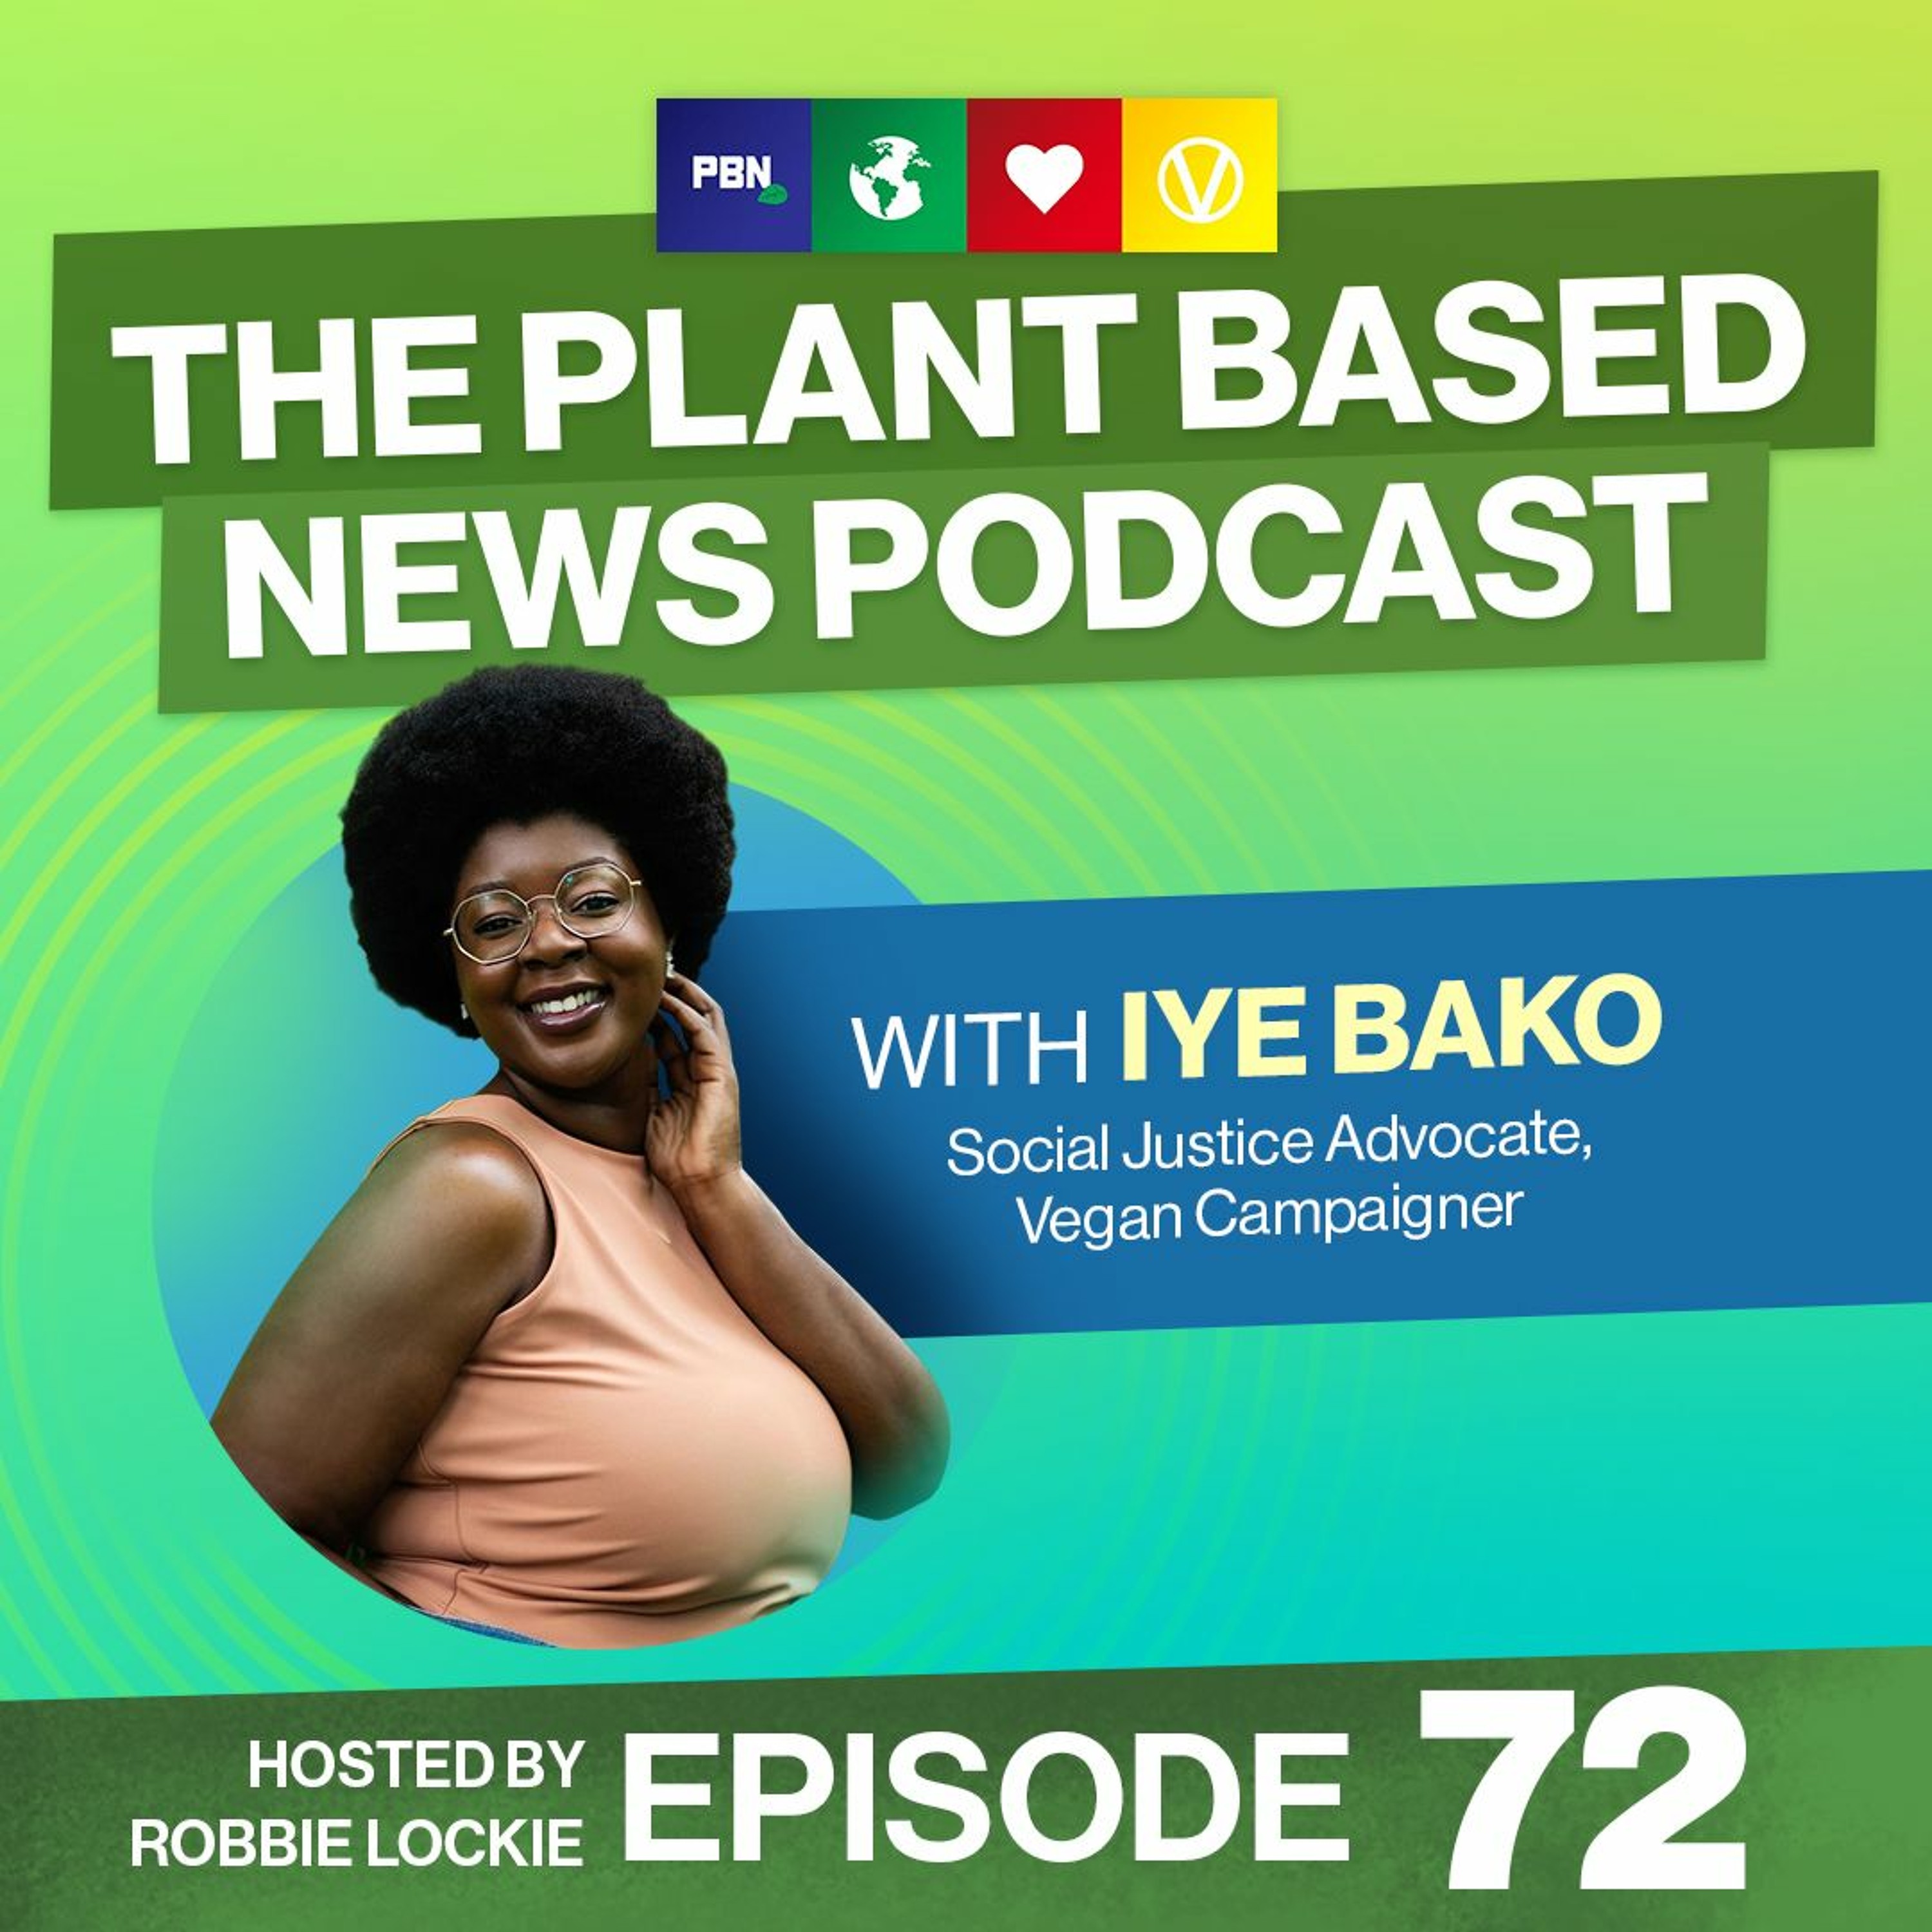 “Veganism Is Not A Cruelty Free Lifestyle” - The Power Of Social Justice With Iye Bako. Episode 72